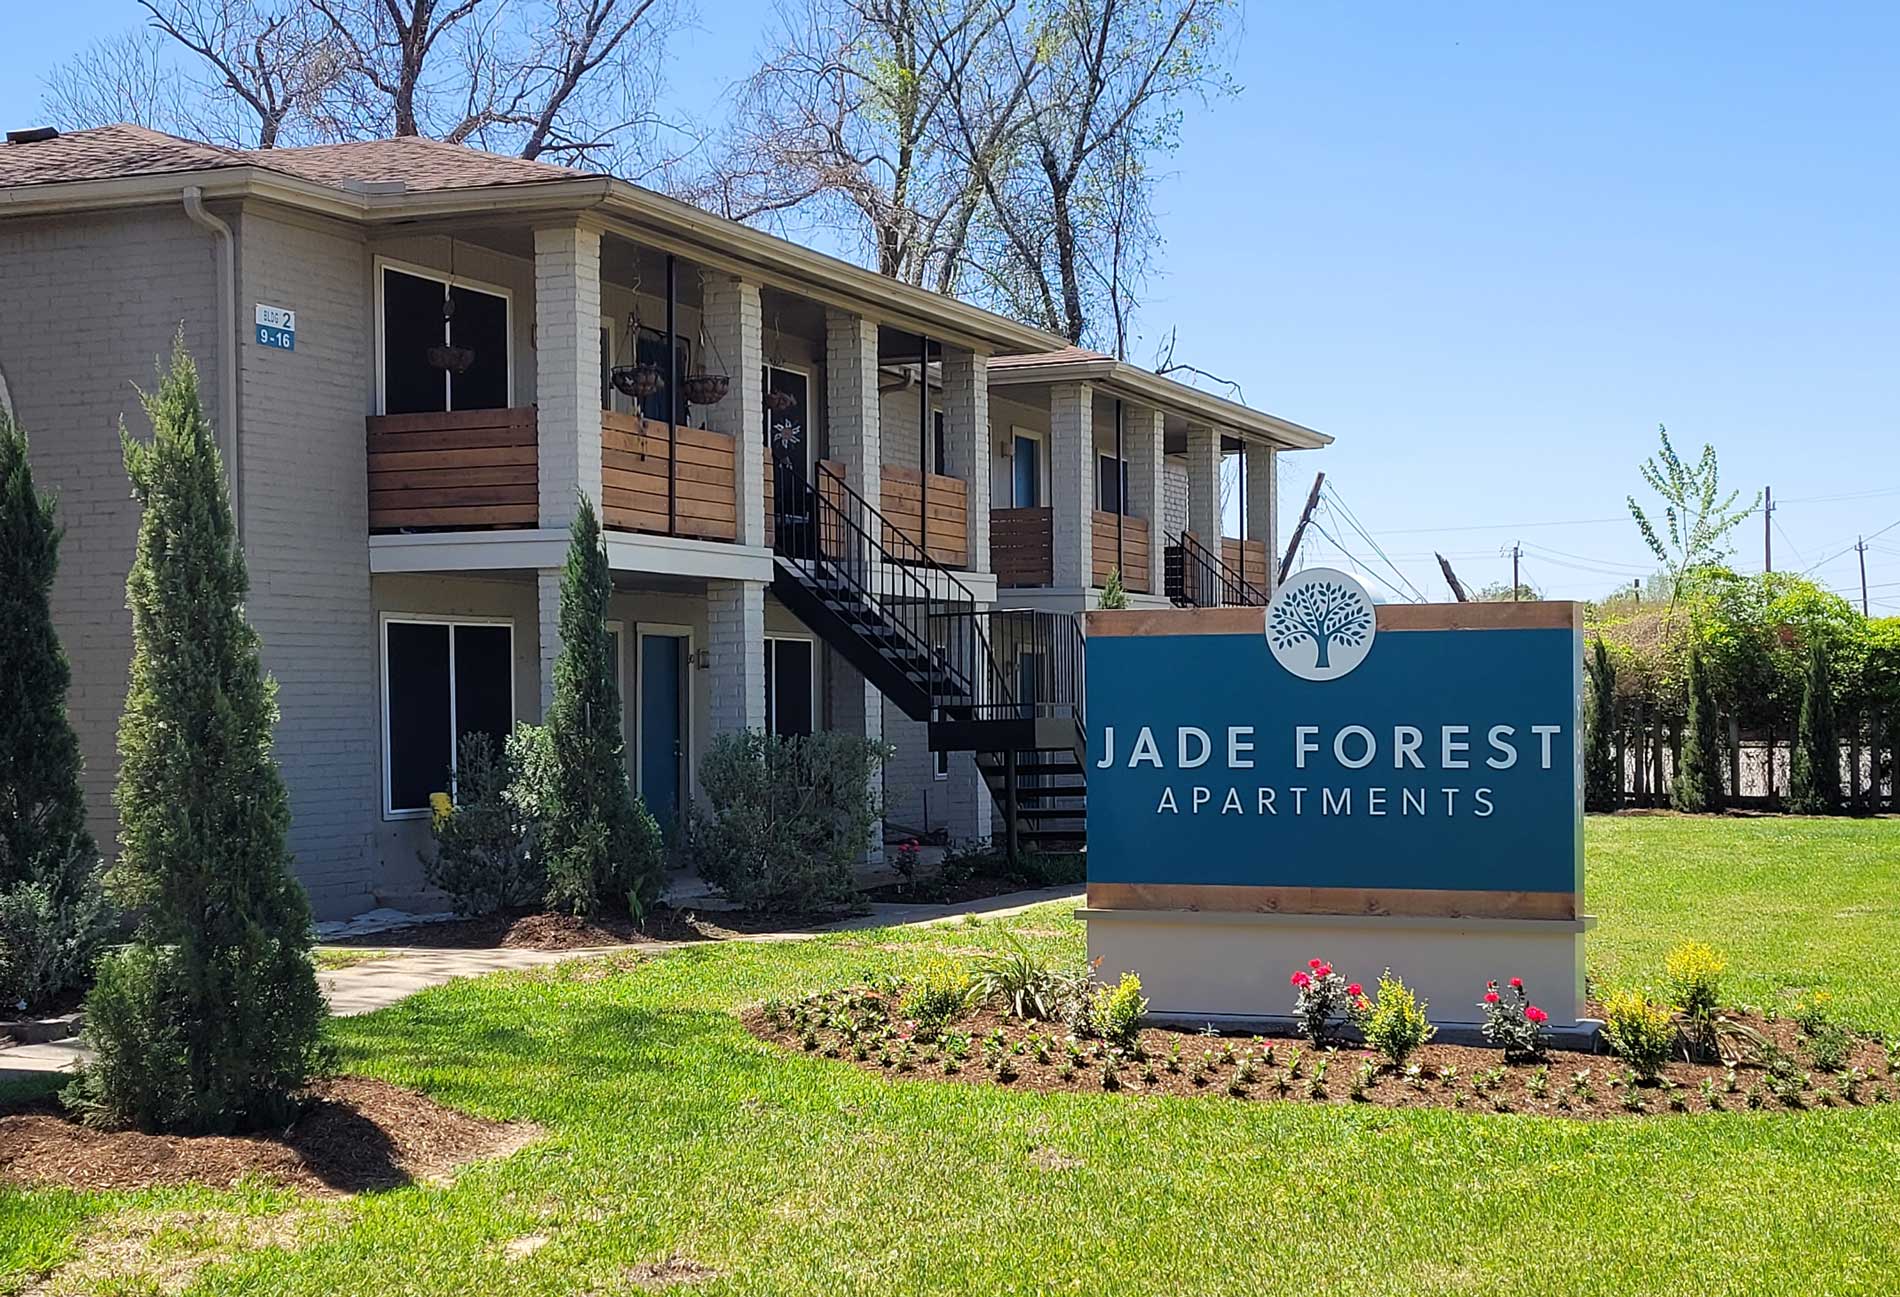 Jade Forest Apartments Property Signage